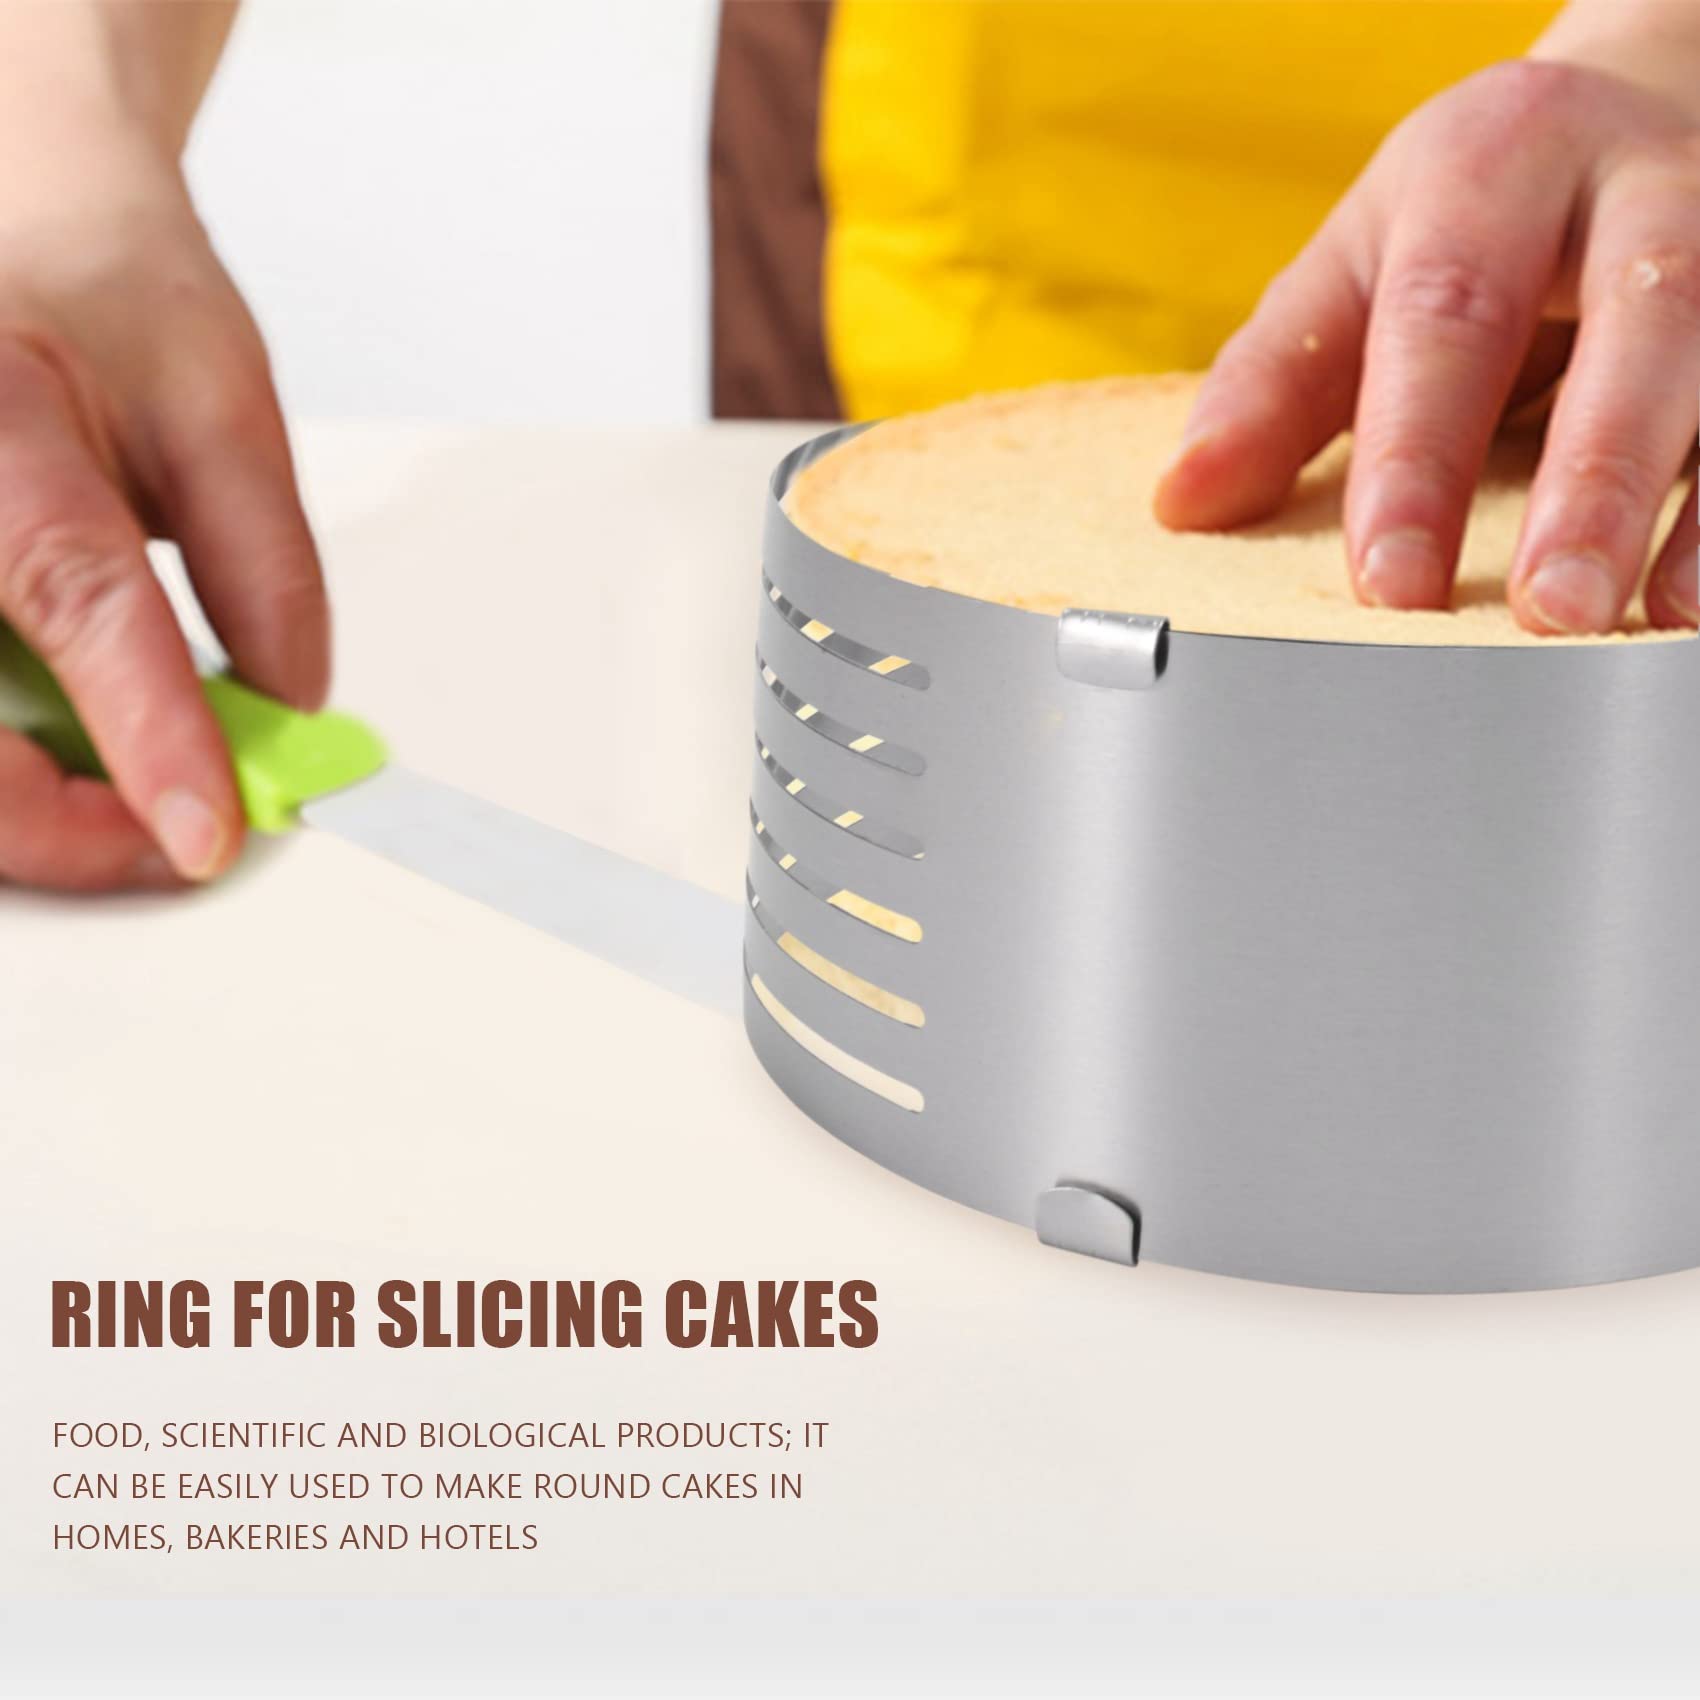 6 to 8 Inch Adjustable Cake Ring for Cutting Layers, Slicing and Leveling Cakes, Stainless Steel 7-Layer Cake Toast Slicer Leveler